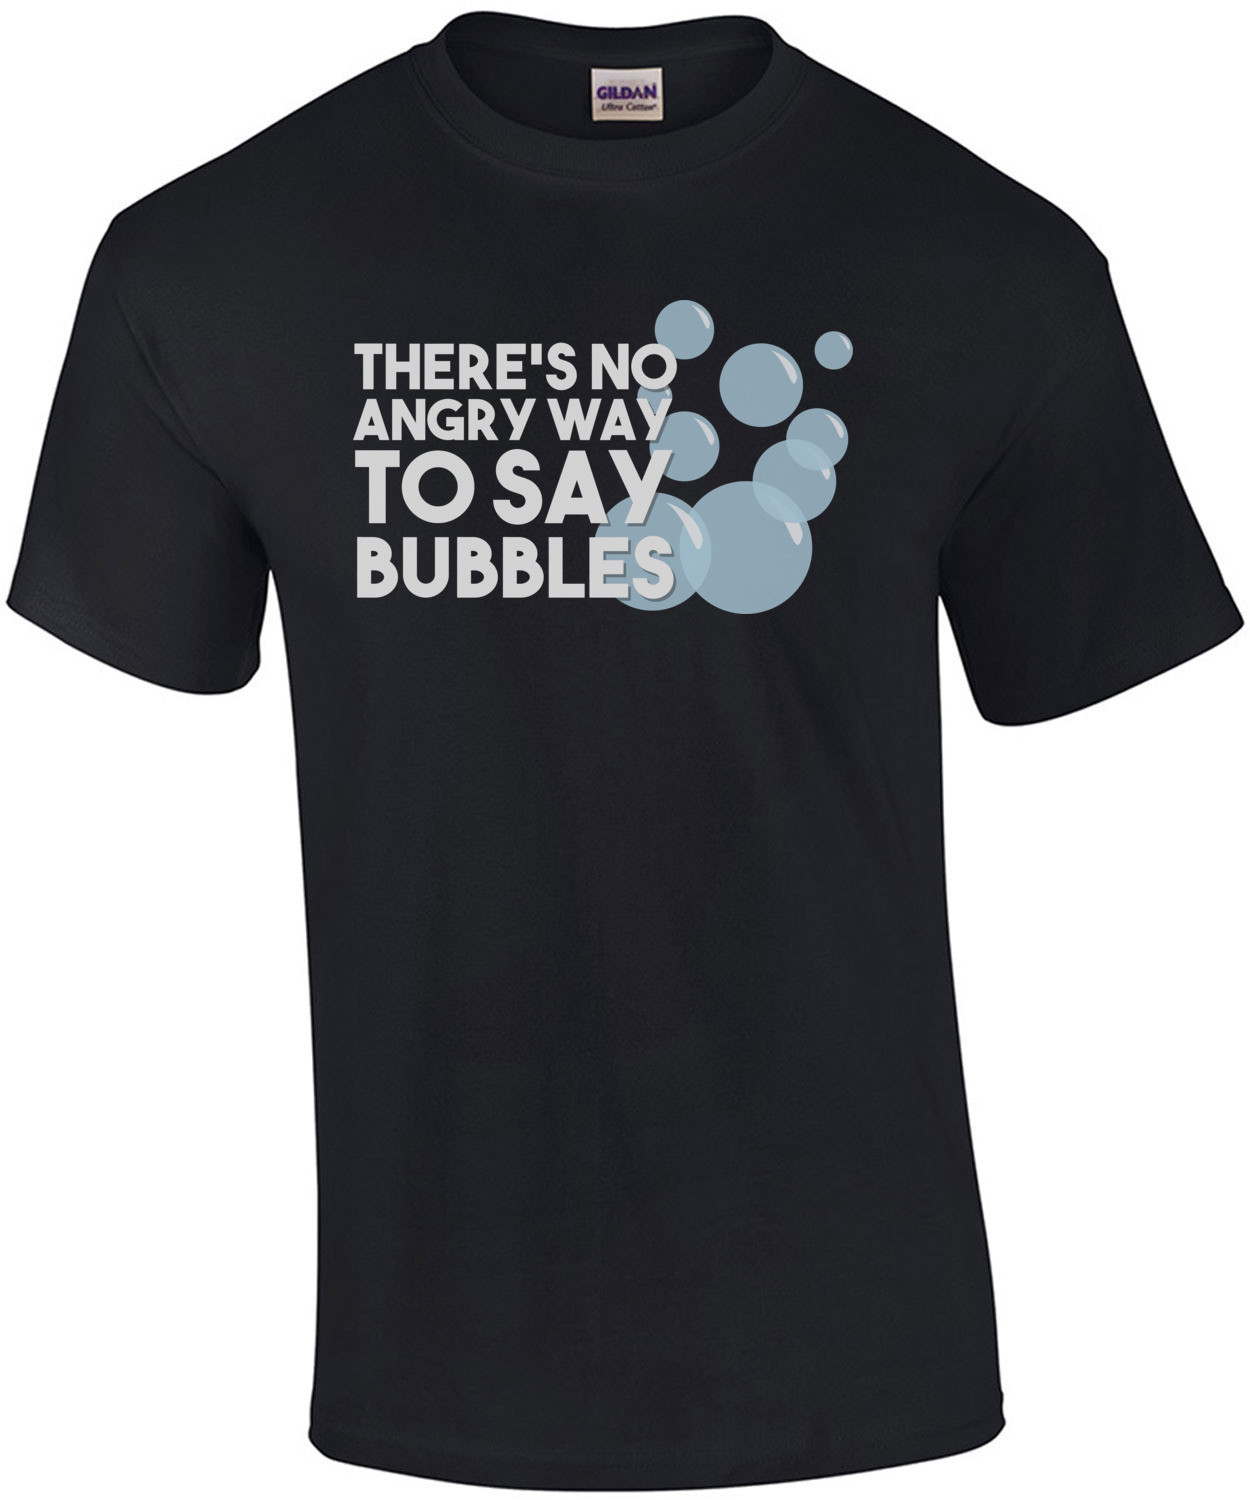 There's no angry way to say bubbles